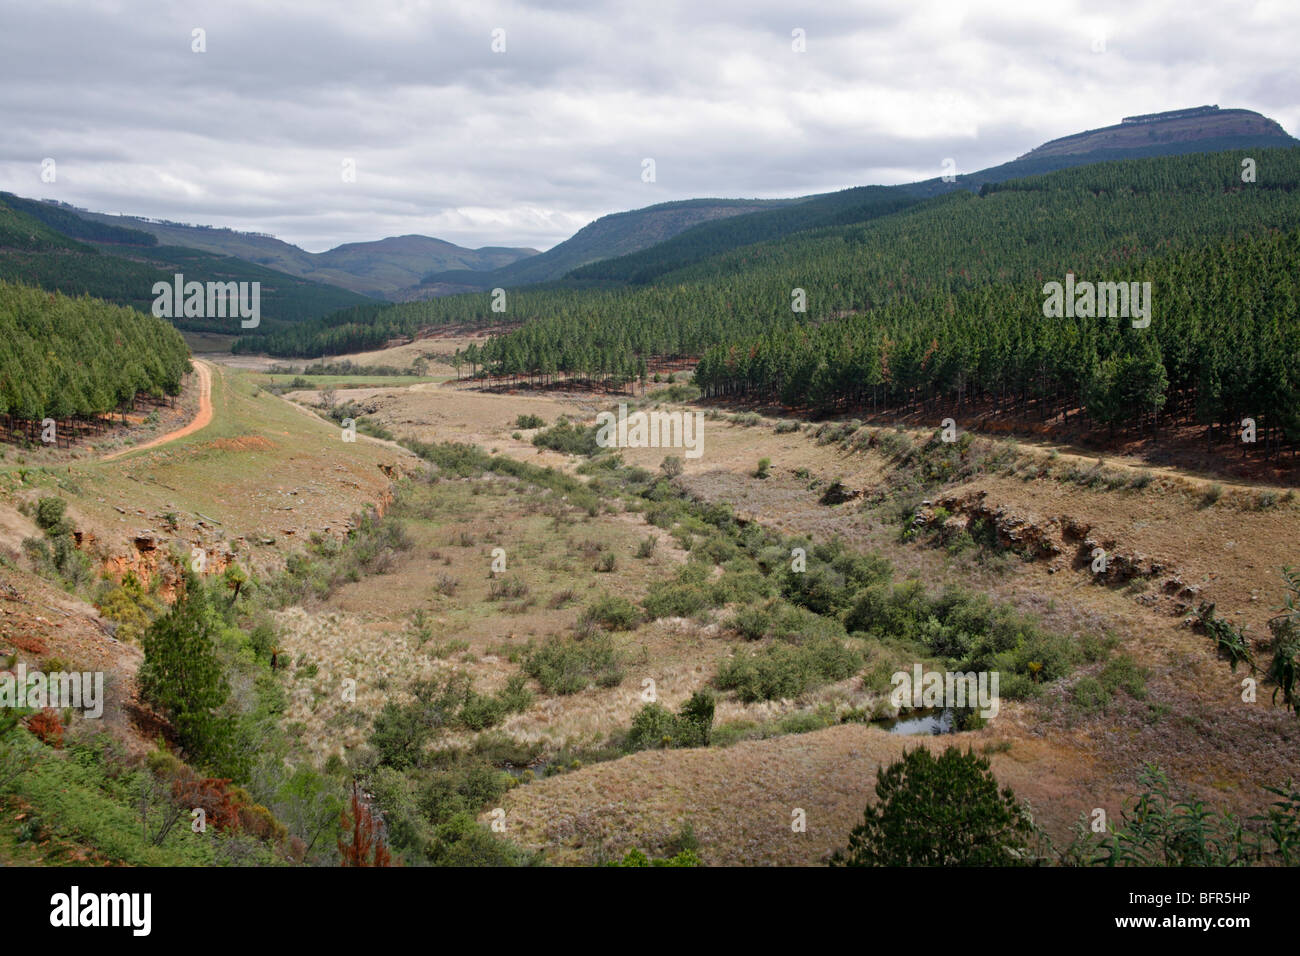 Scenic view up a valley in the upper reaches of the Blyde river with pine plantations on the slopes Stock Photo